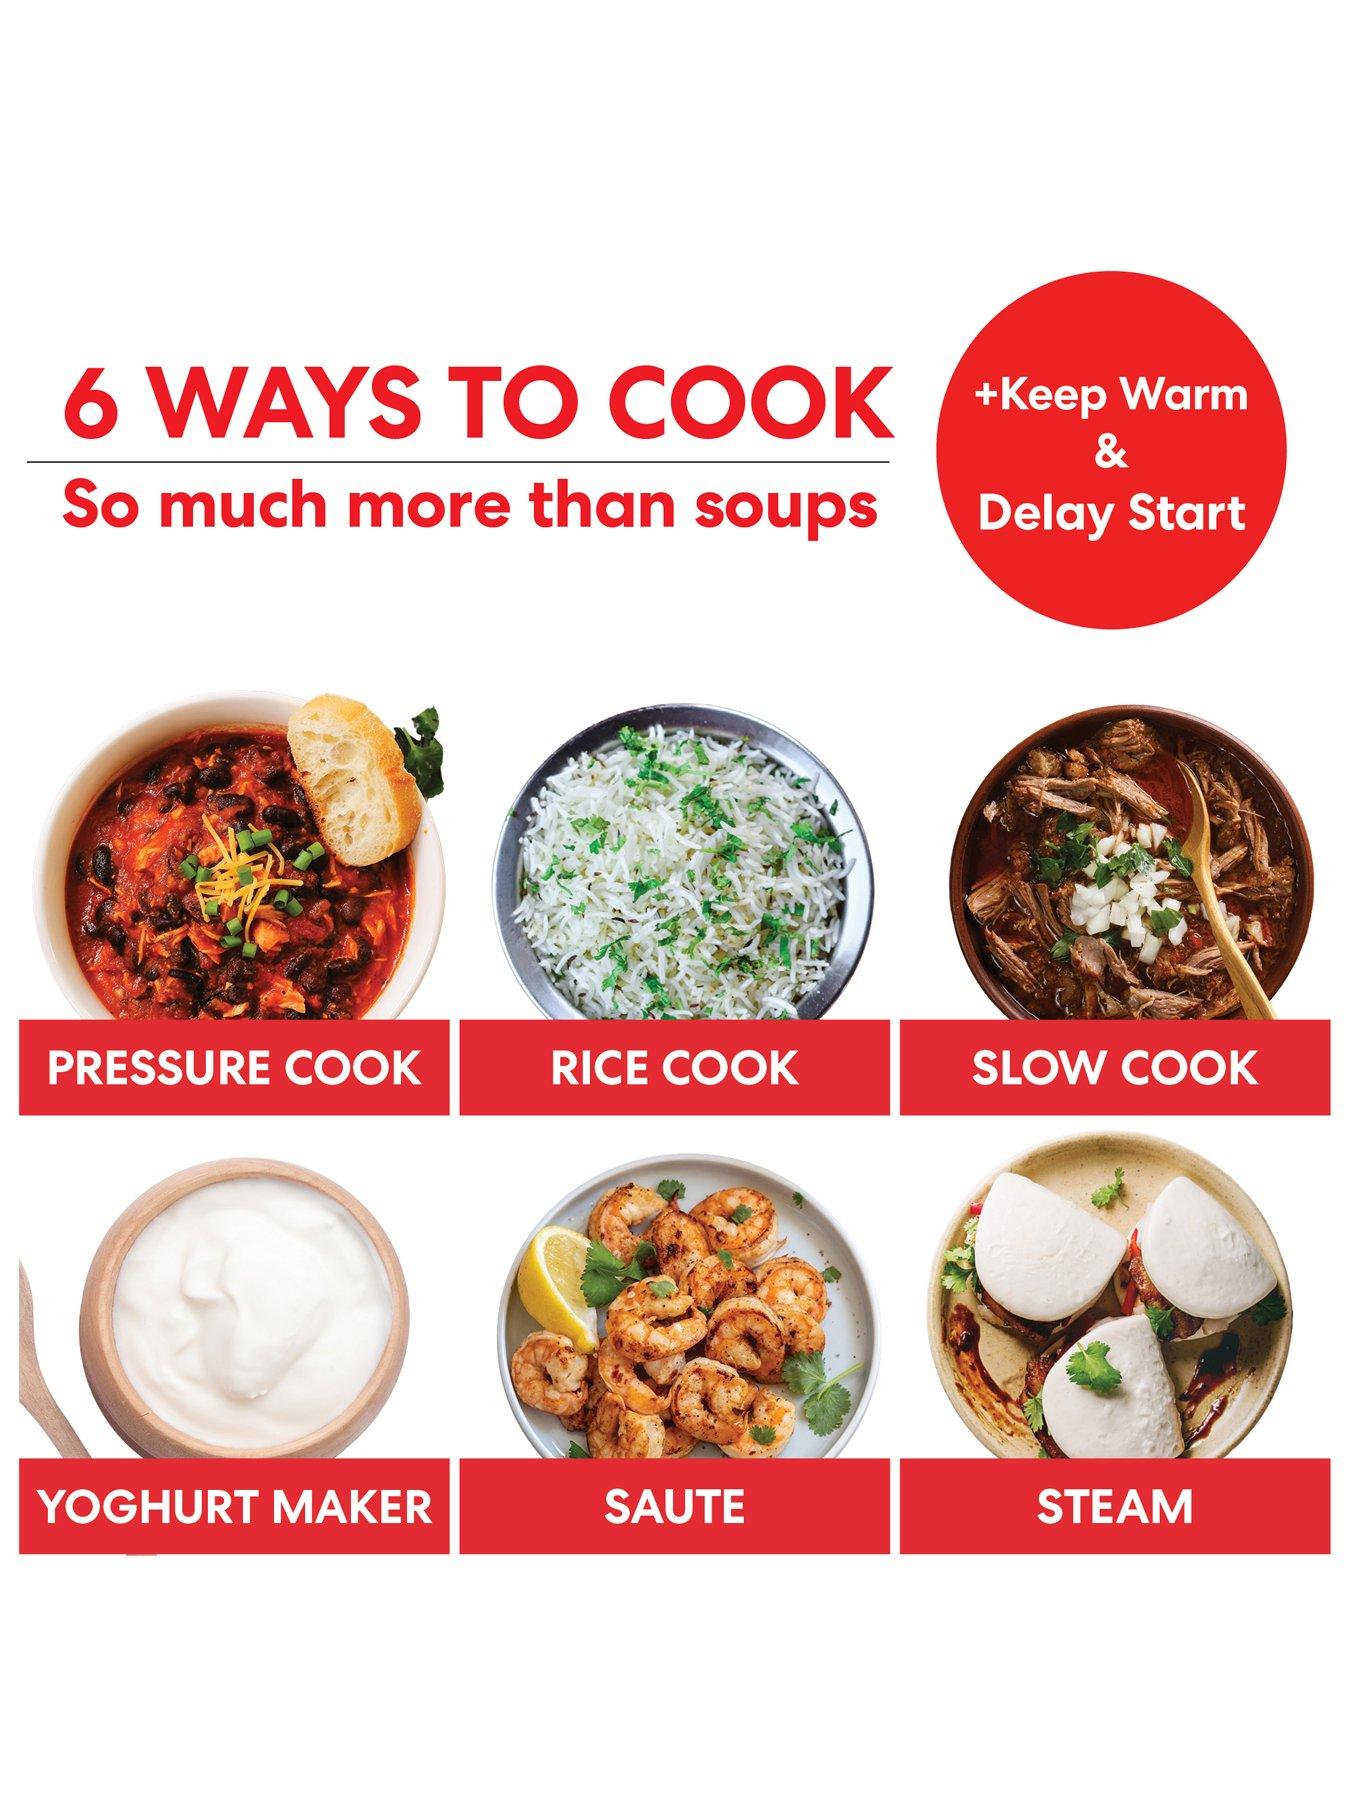 Instant Pot Duo 60 5.7L | Very.co.uk